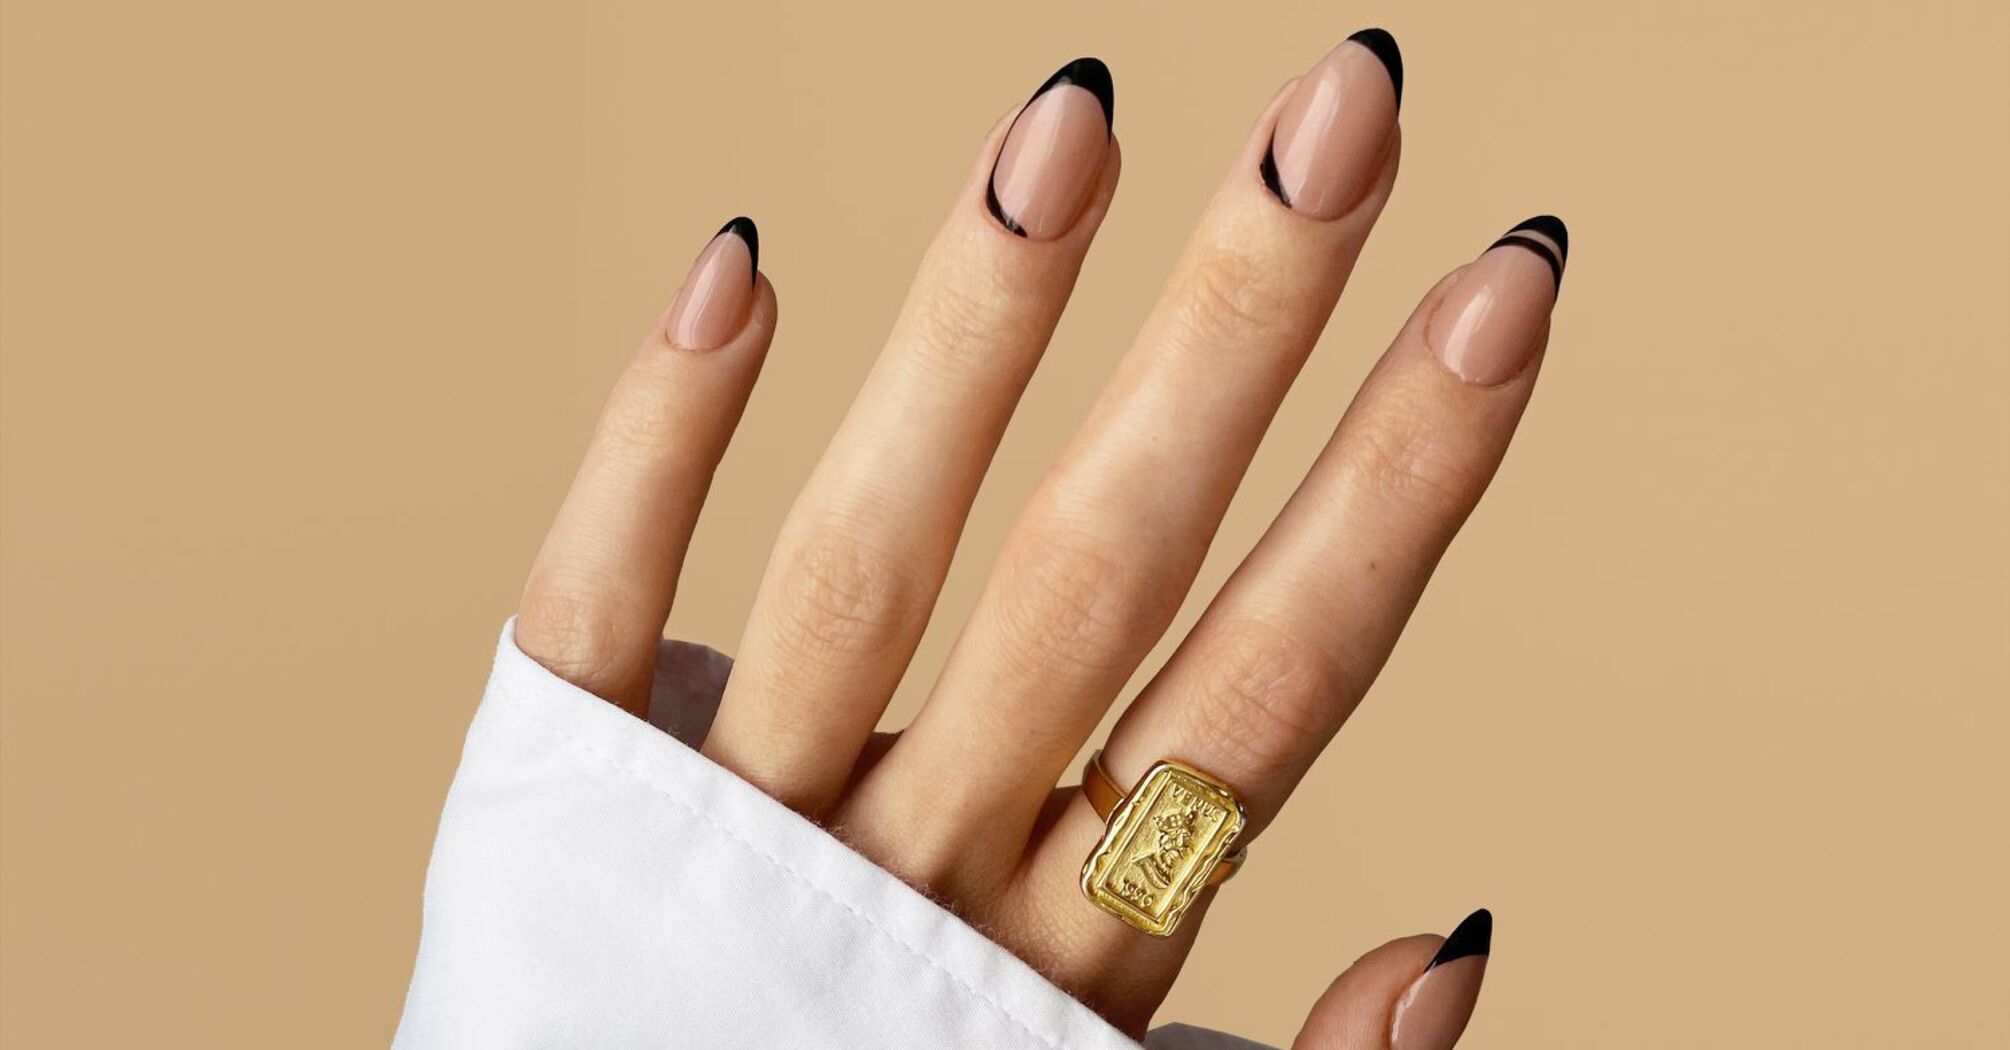 French manicure is back, but not exactly as it used to be